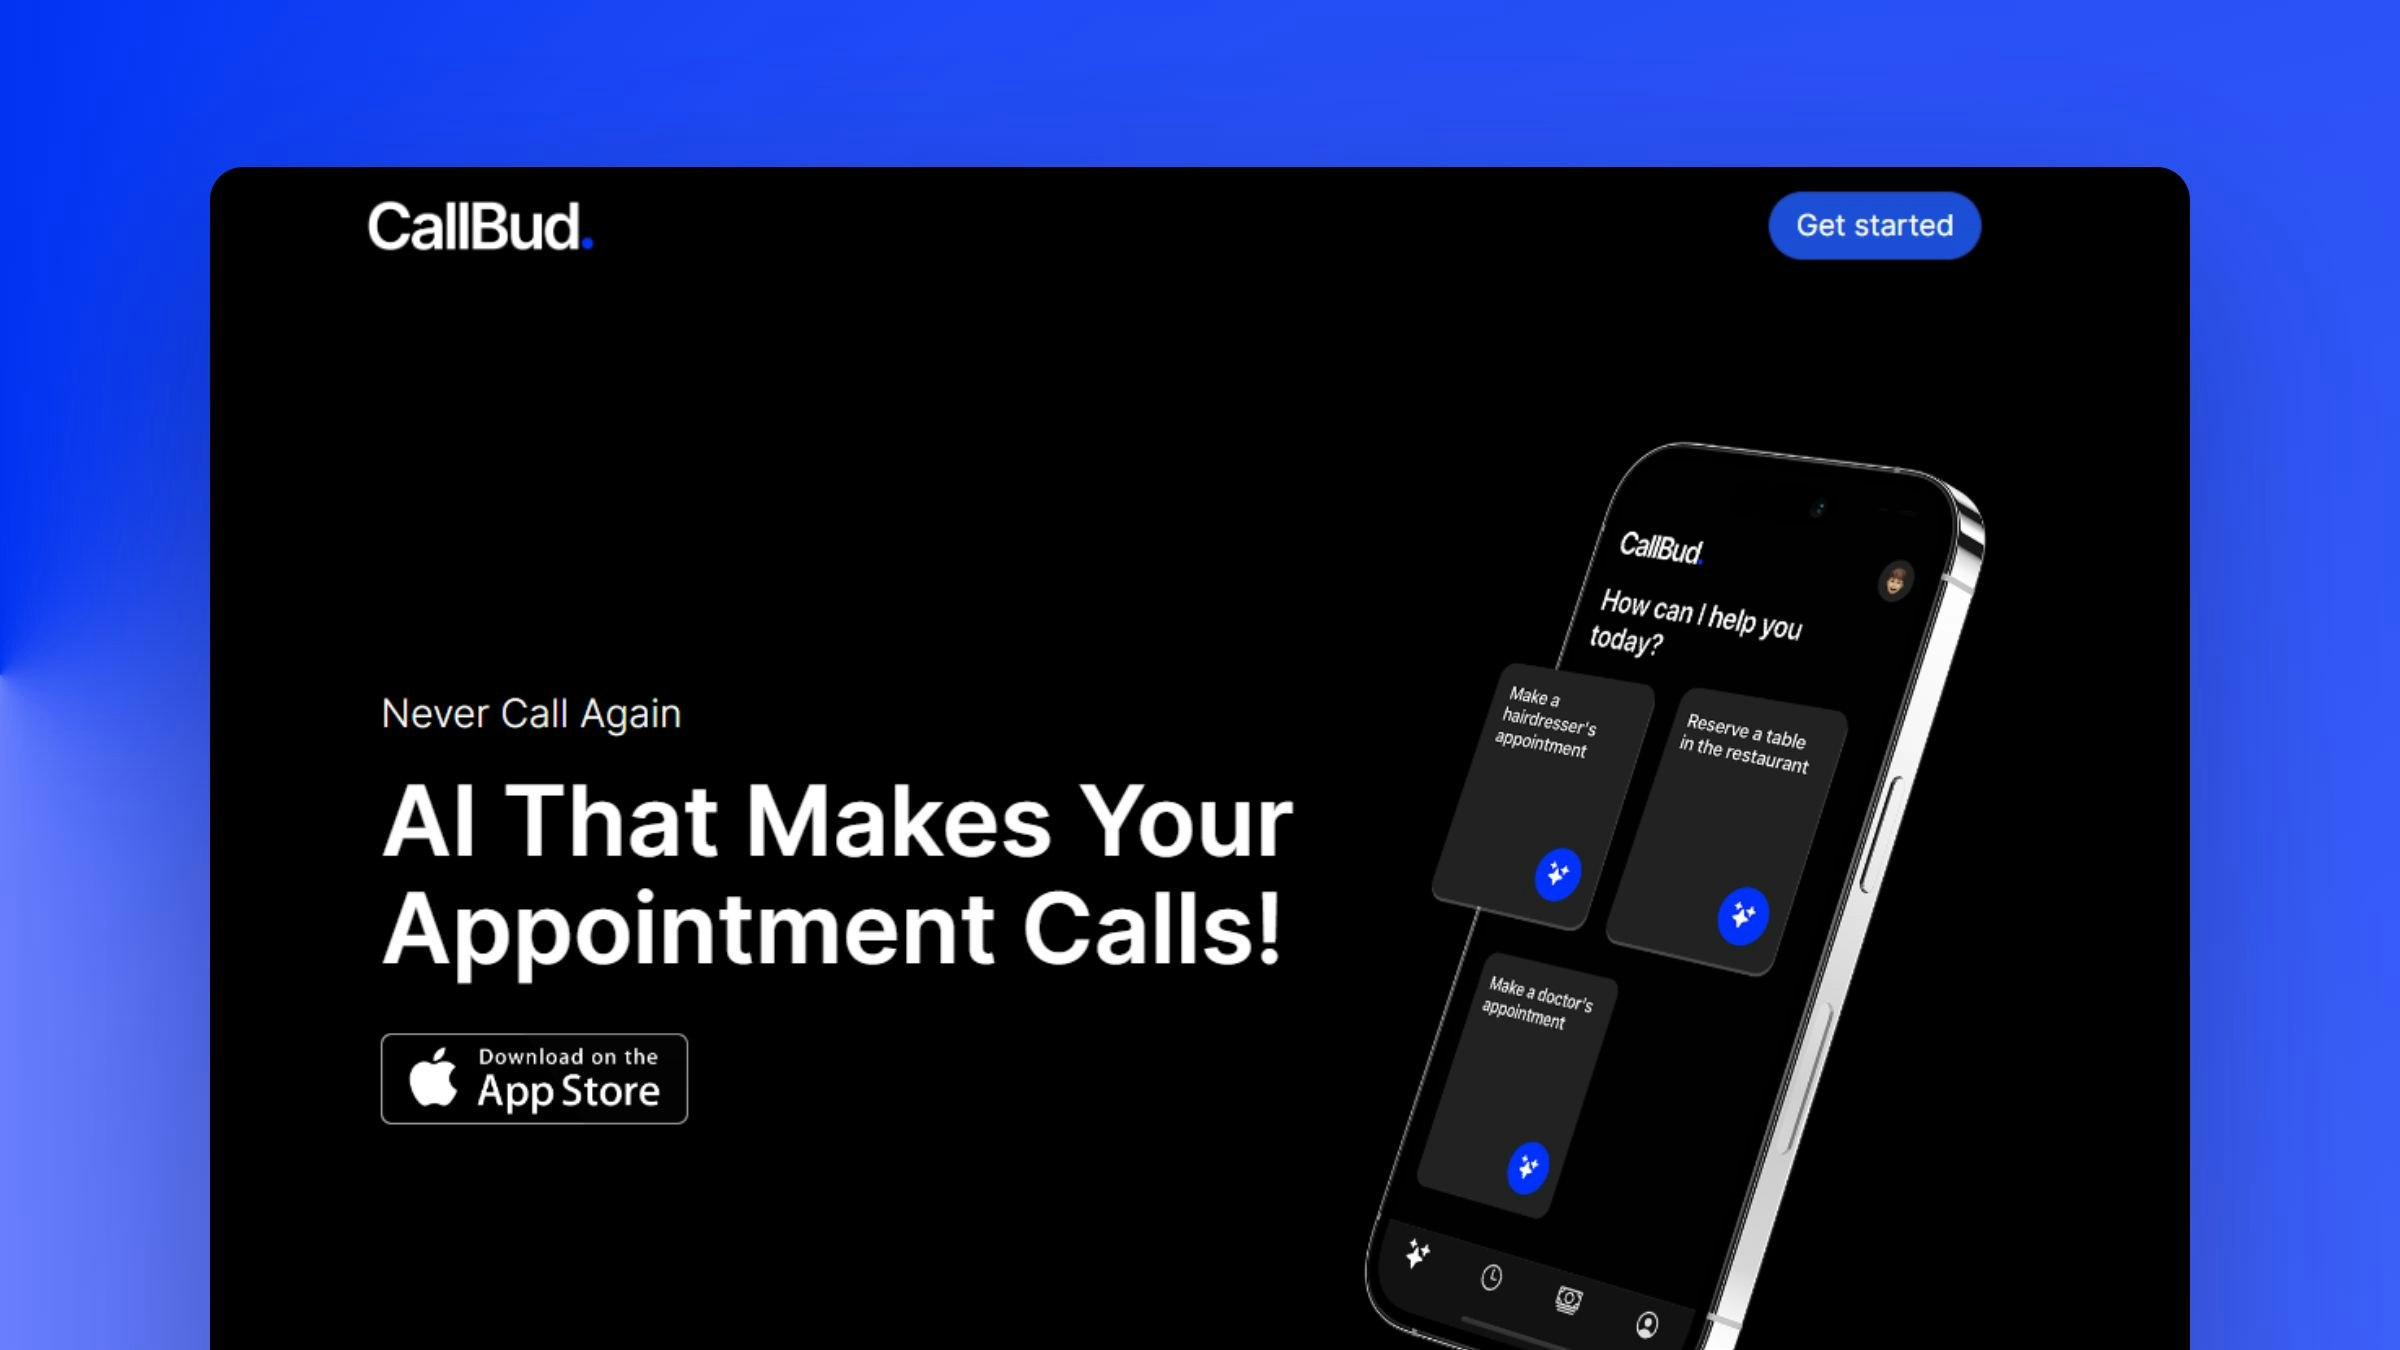 callbud-ai - AI that makes your appointment calls